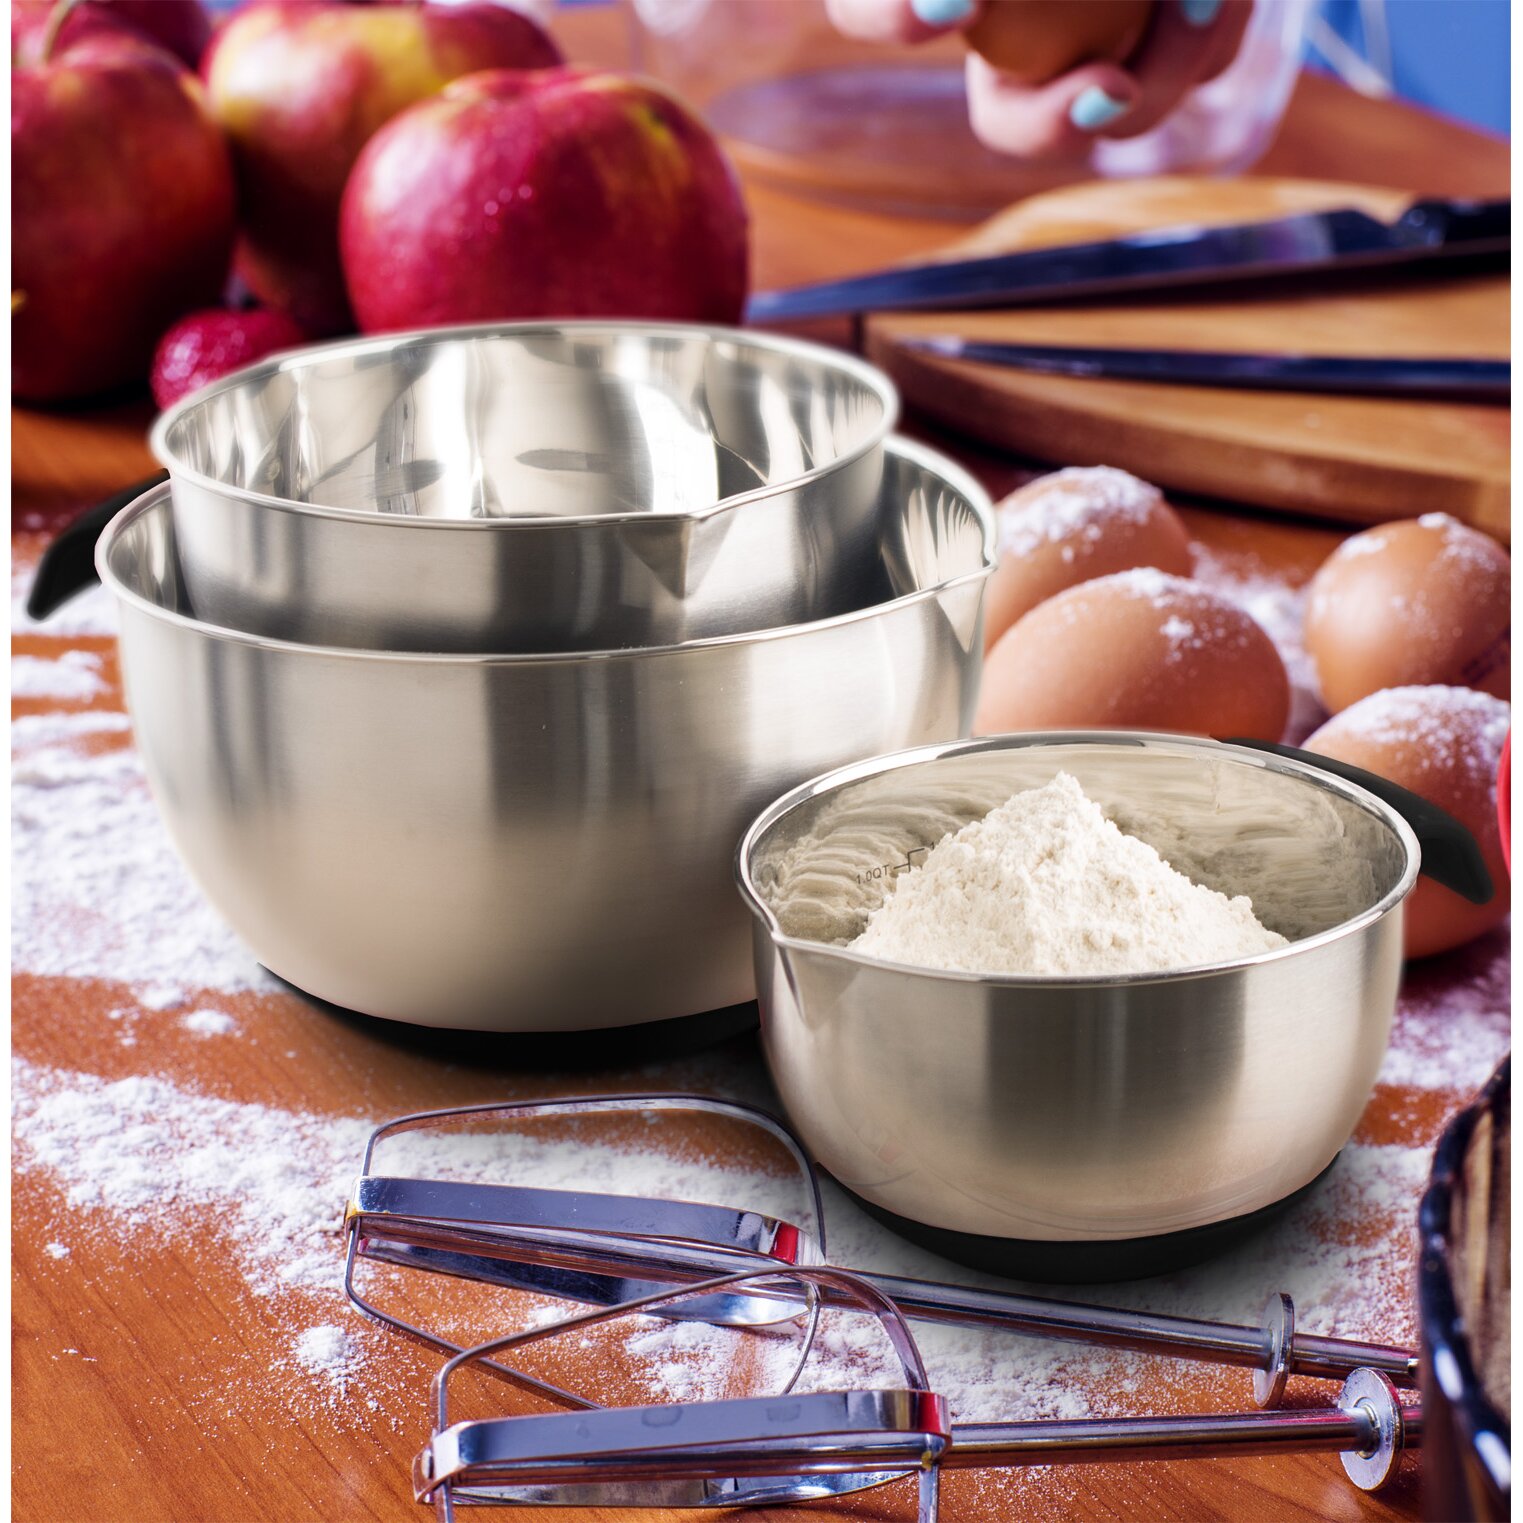 18 10 stainless steel mixing bowls